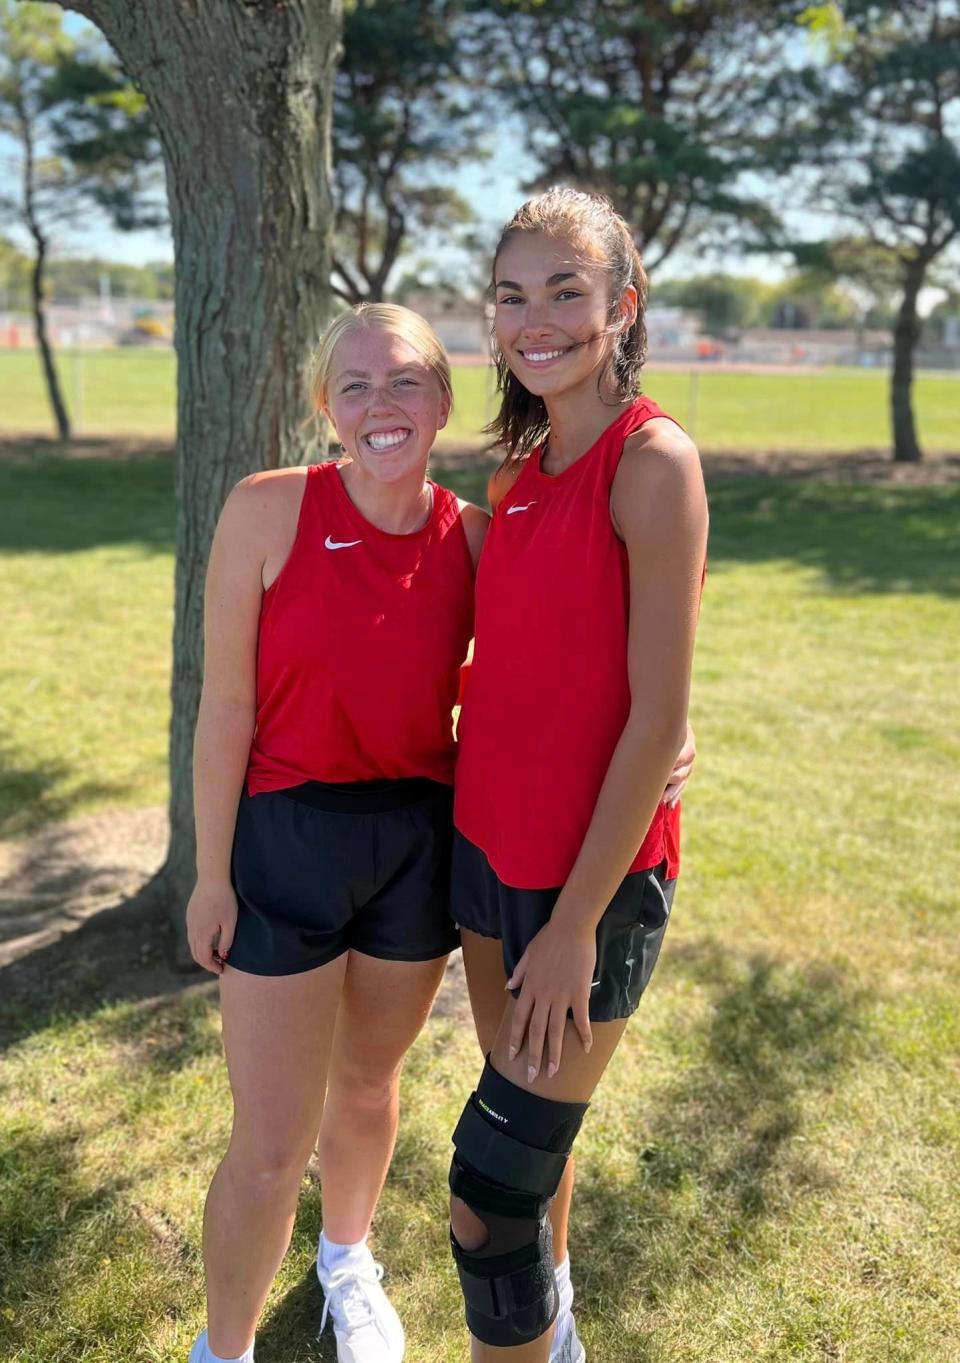 Shelby juniors Annie Mahek (left) and Bella Carver (right) secured a state tennis tournament berth on Wednesday as a double team at the Division II district tournament.